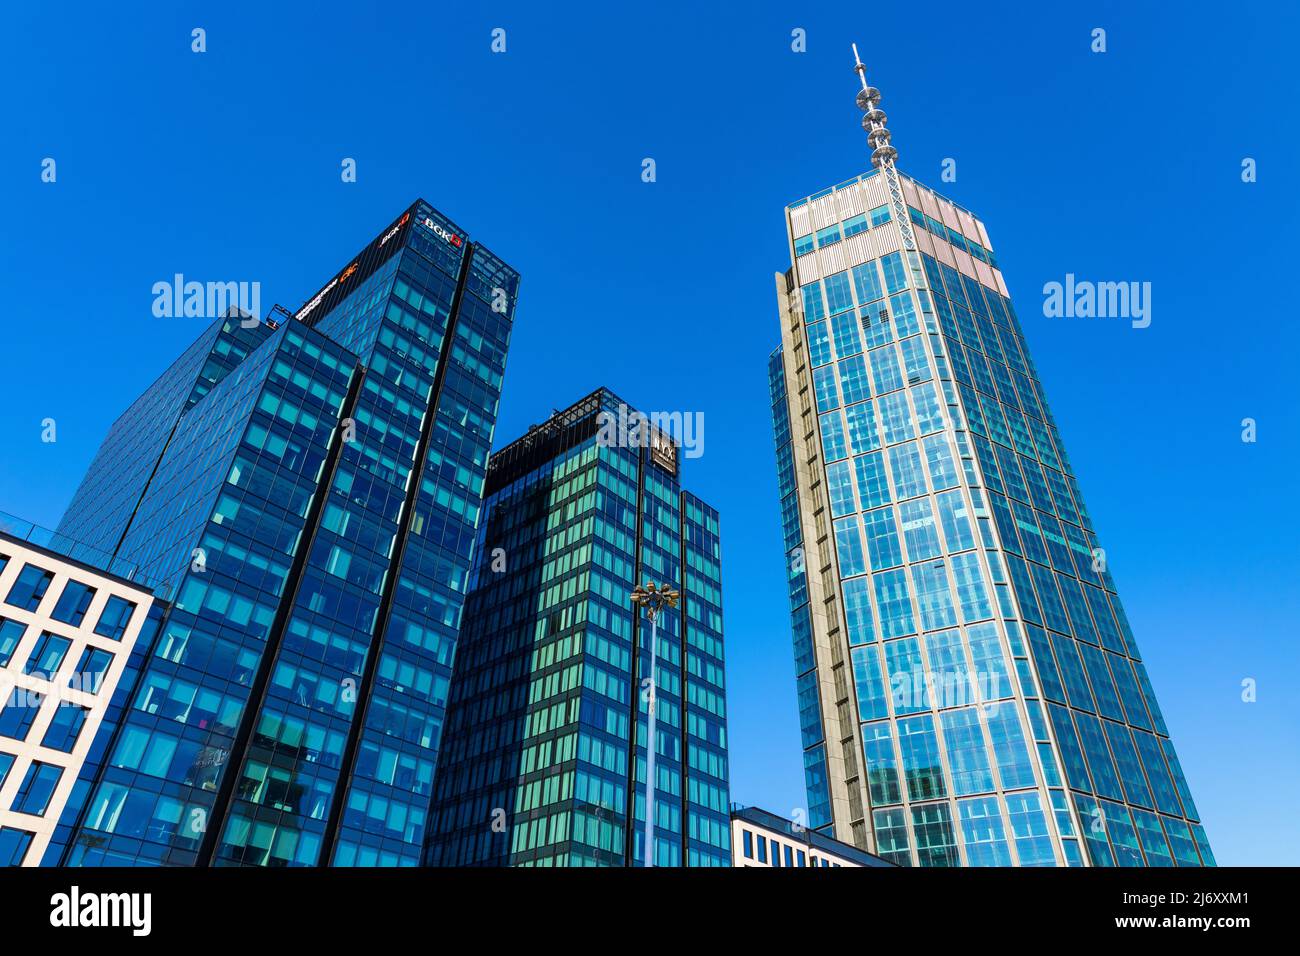 Warsaw, Poland - March 18, 2022: Varso Place Tower by HB Reavis office and hotel complex at Chmielna street in Srodmiescie business district of Warsaw Stock Photo